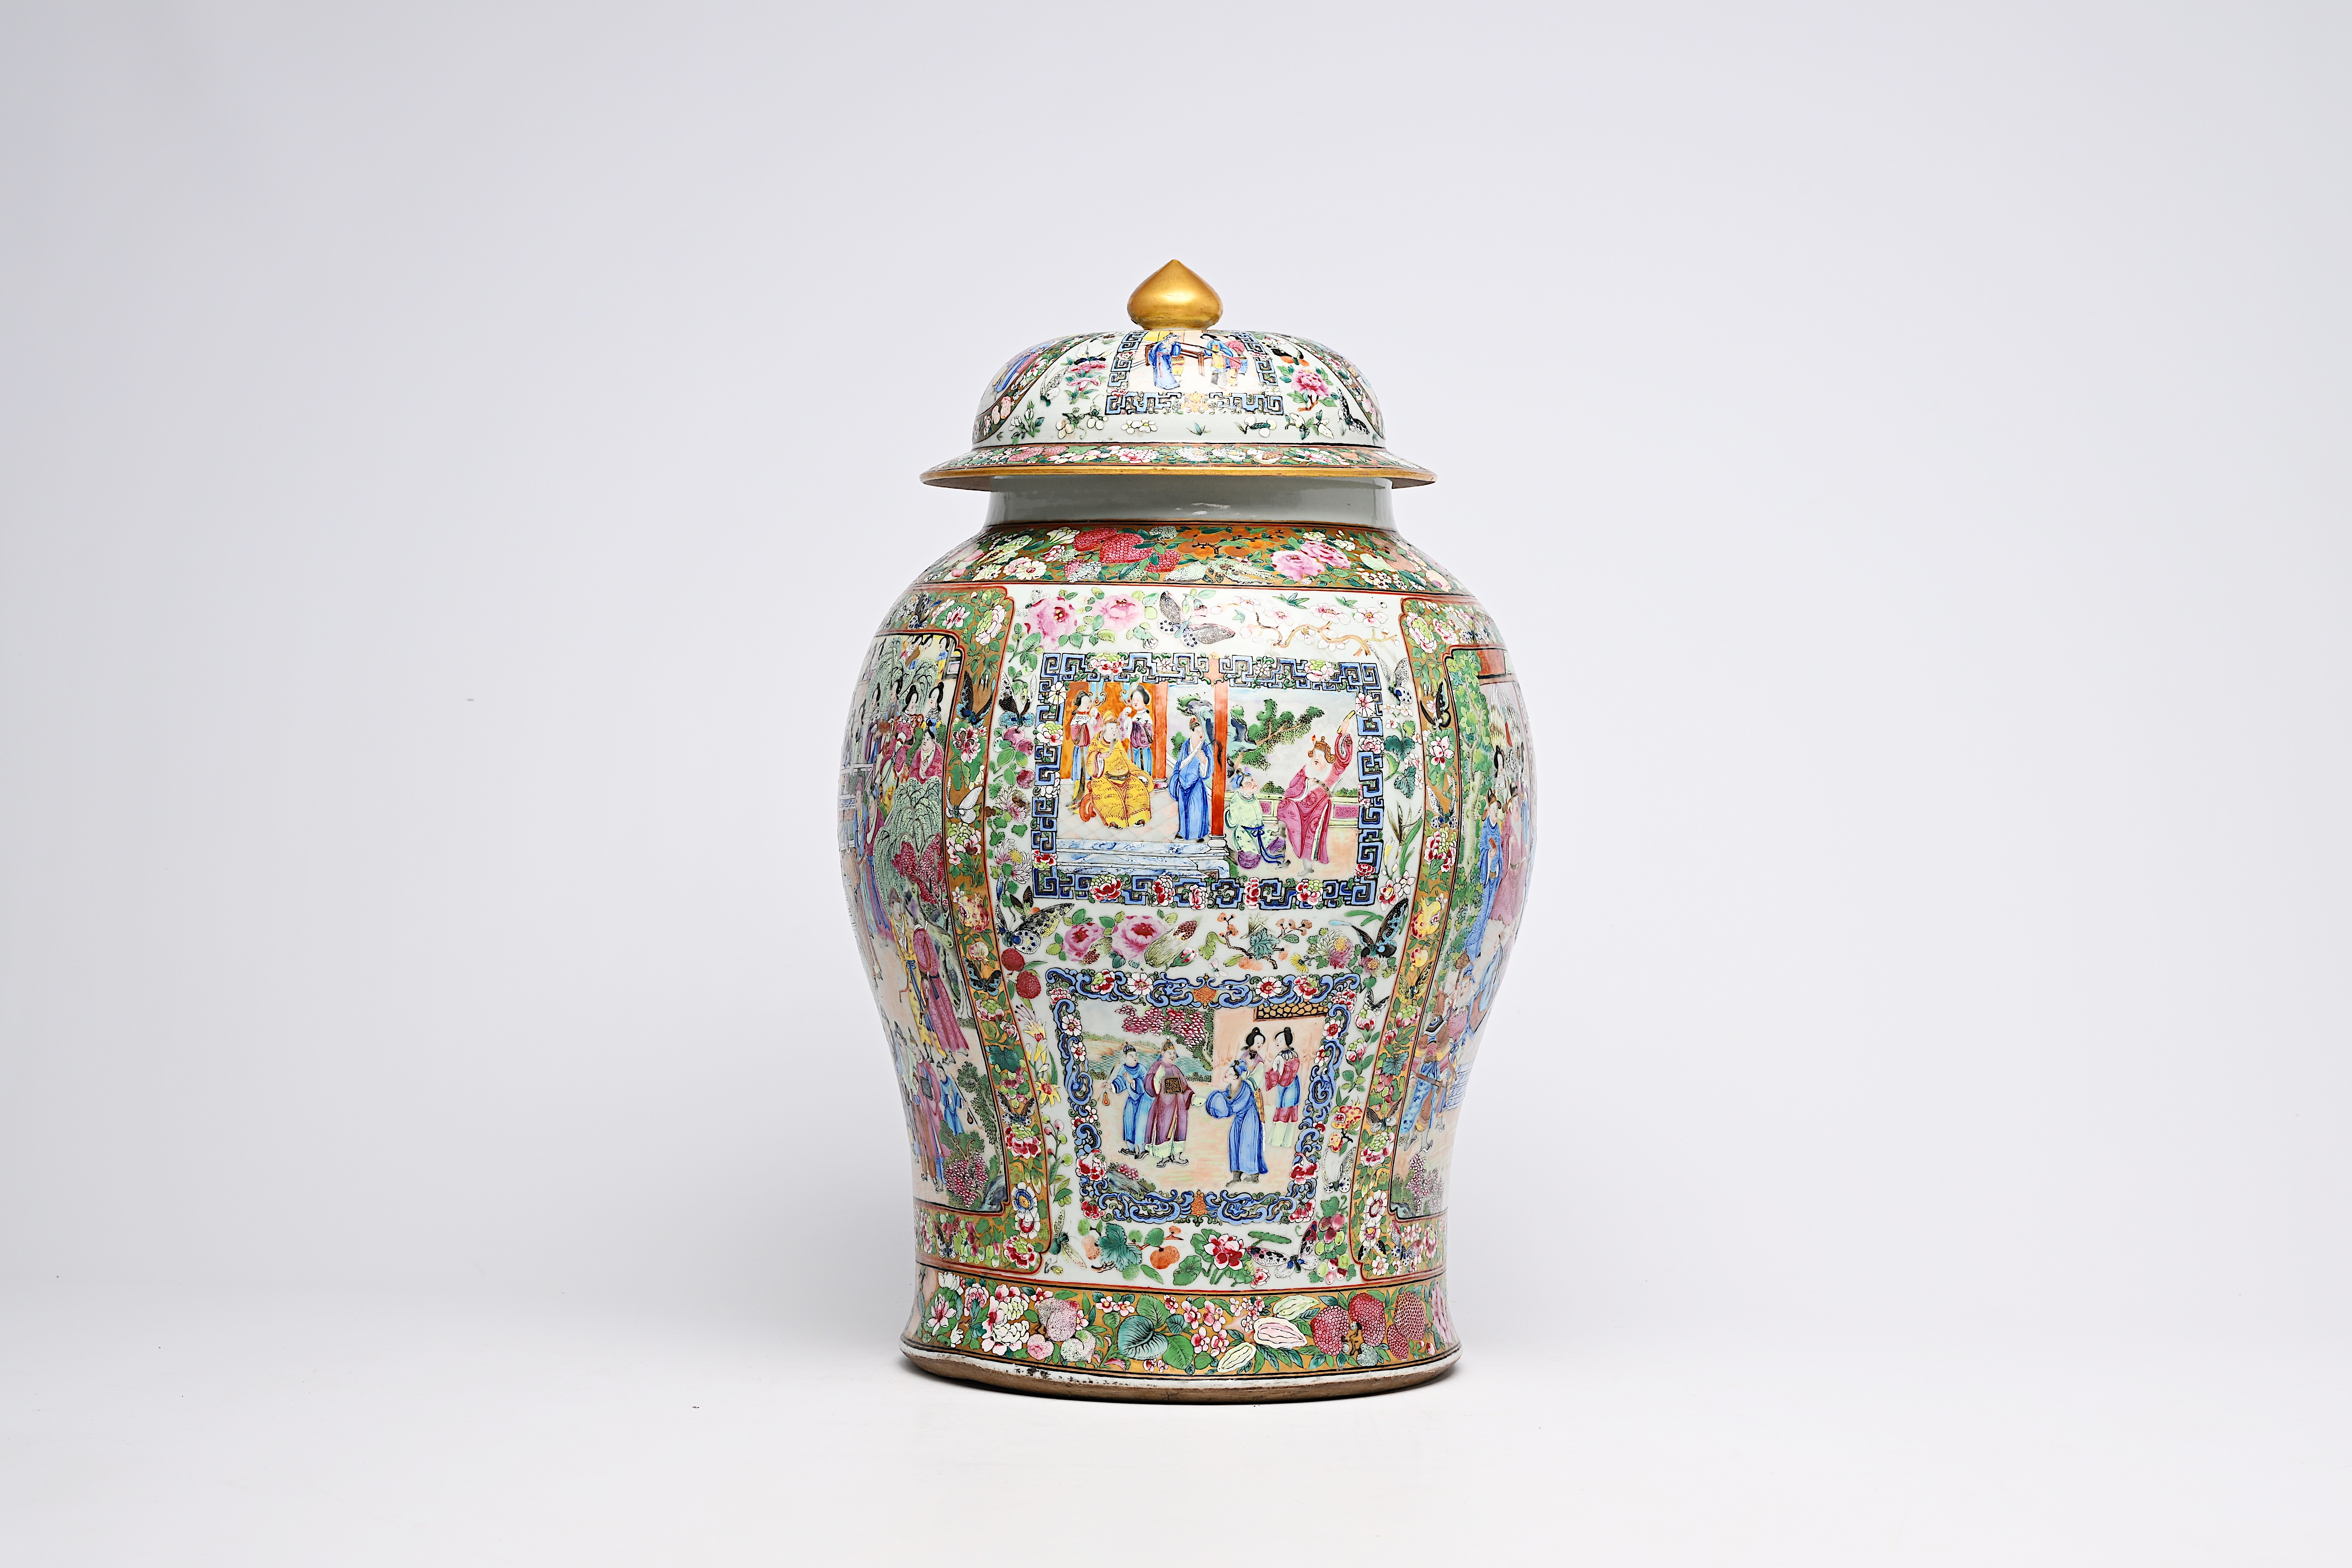 A fine Chinese Canton famille rose vase and cover with palace scenes and floral design, 19th C. - Image 3 of 9